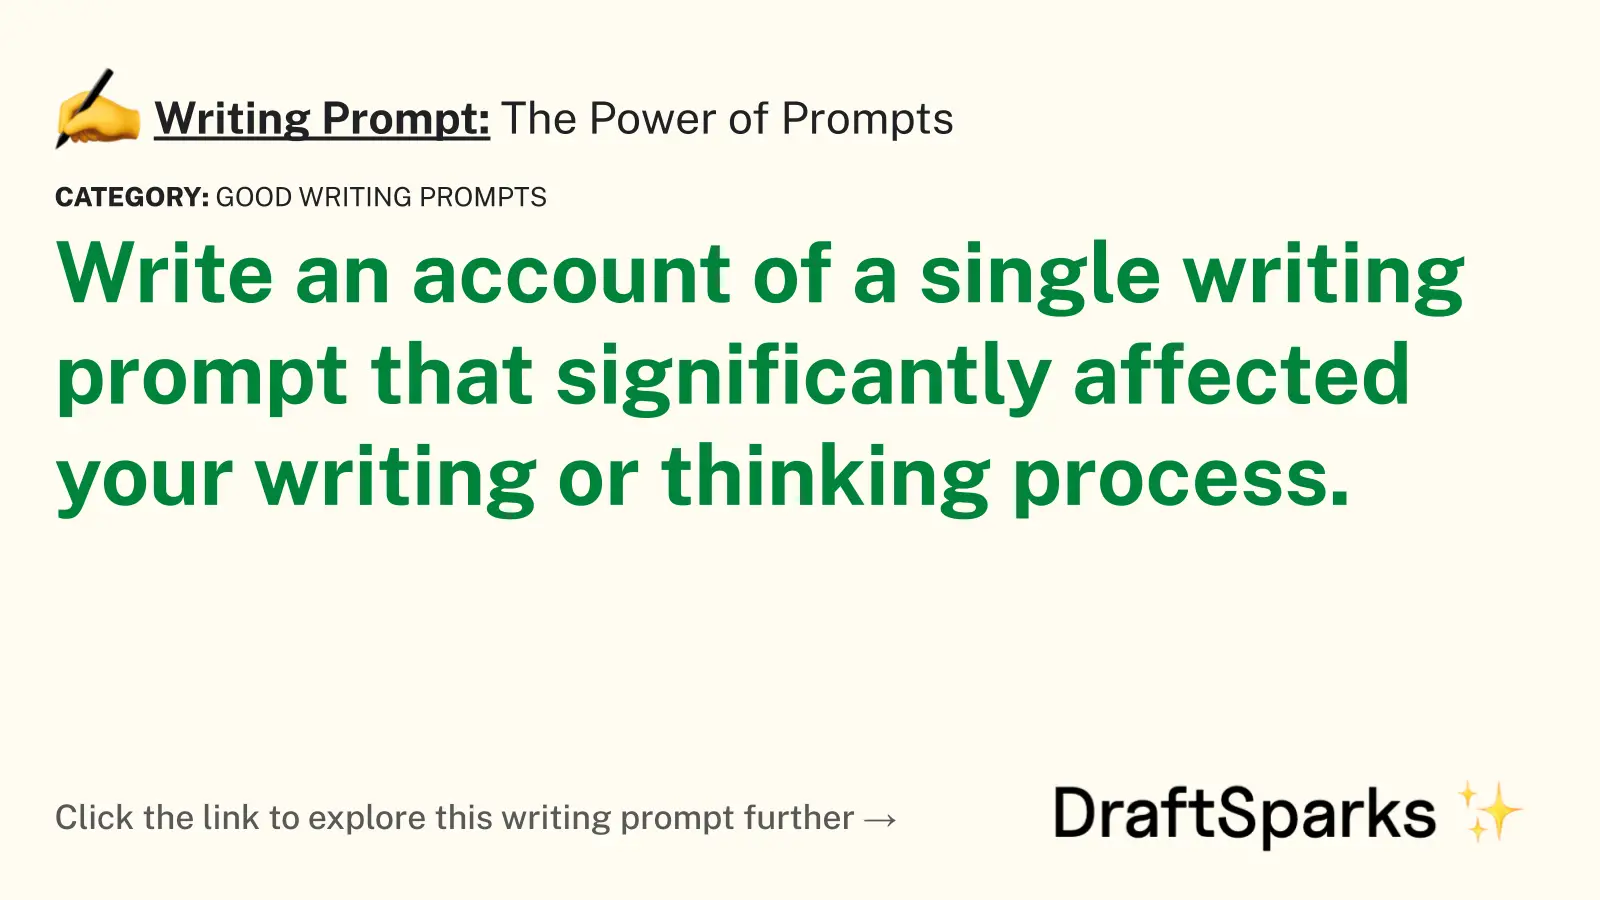 The Power of Prompts